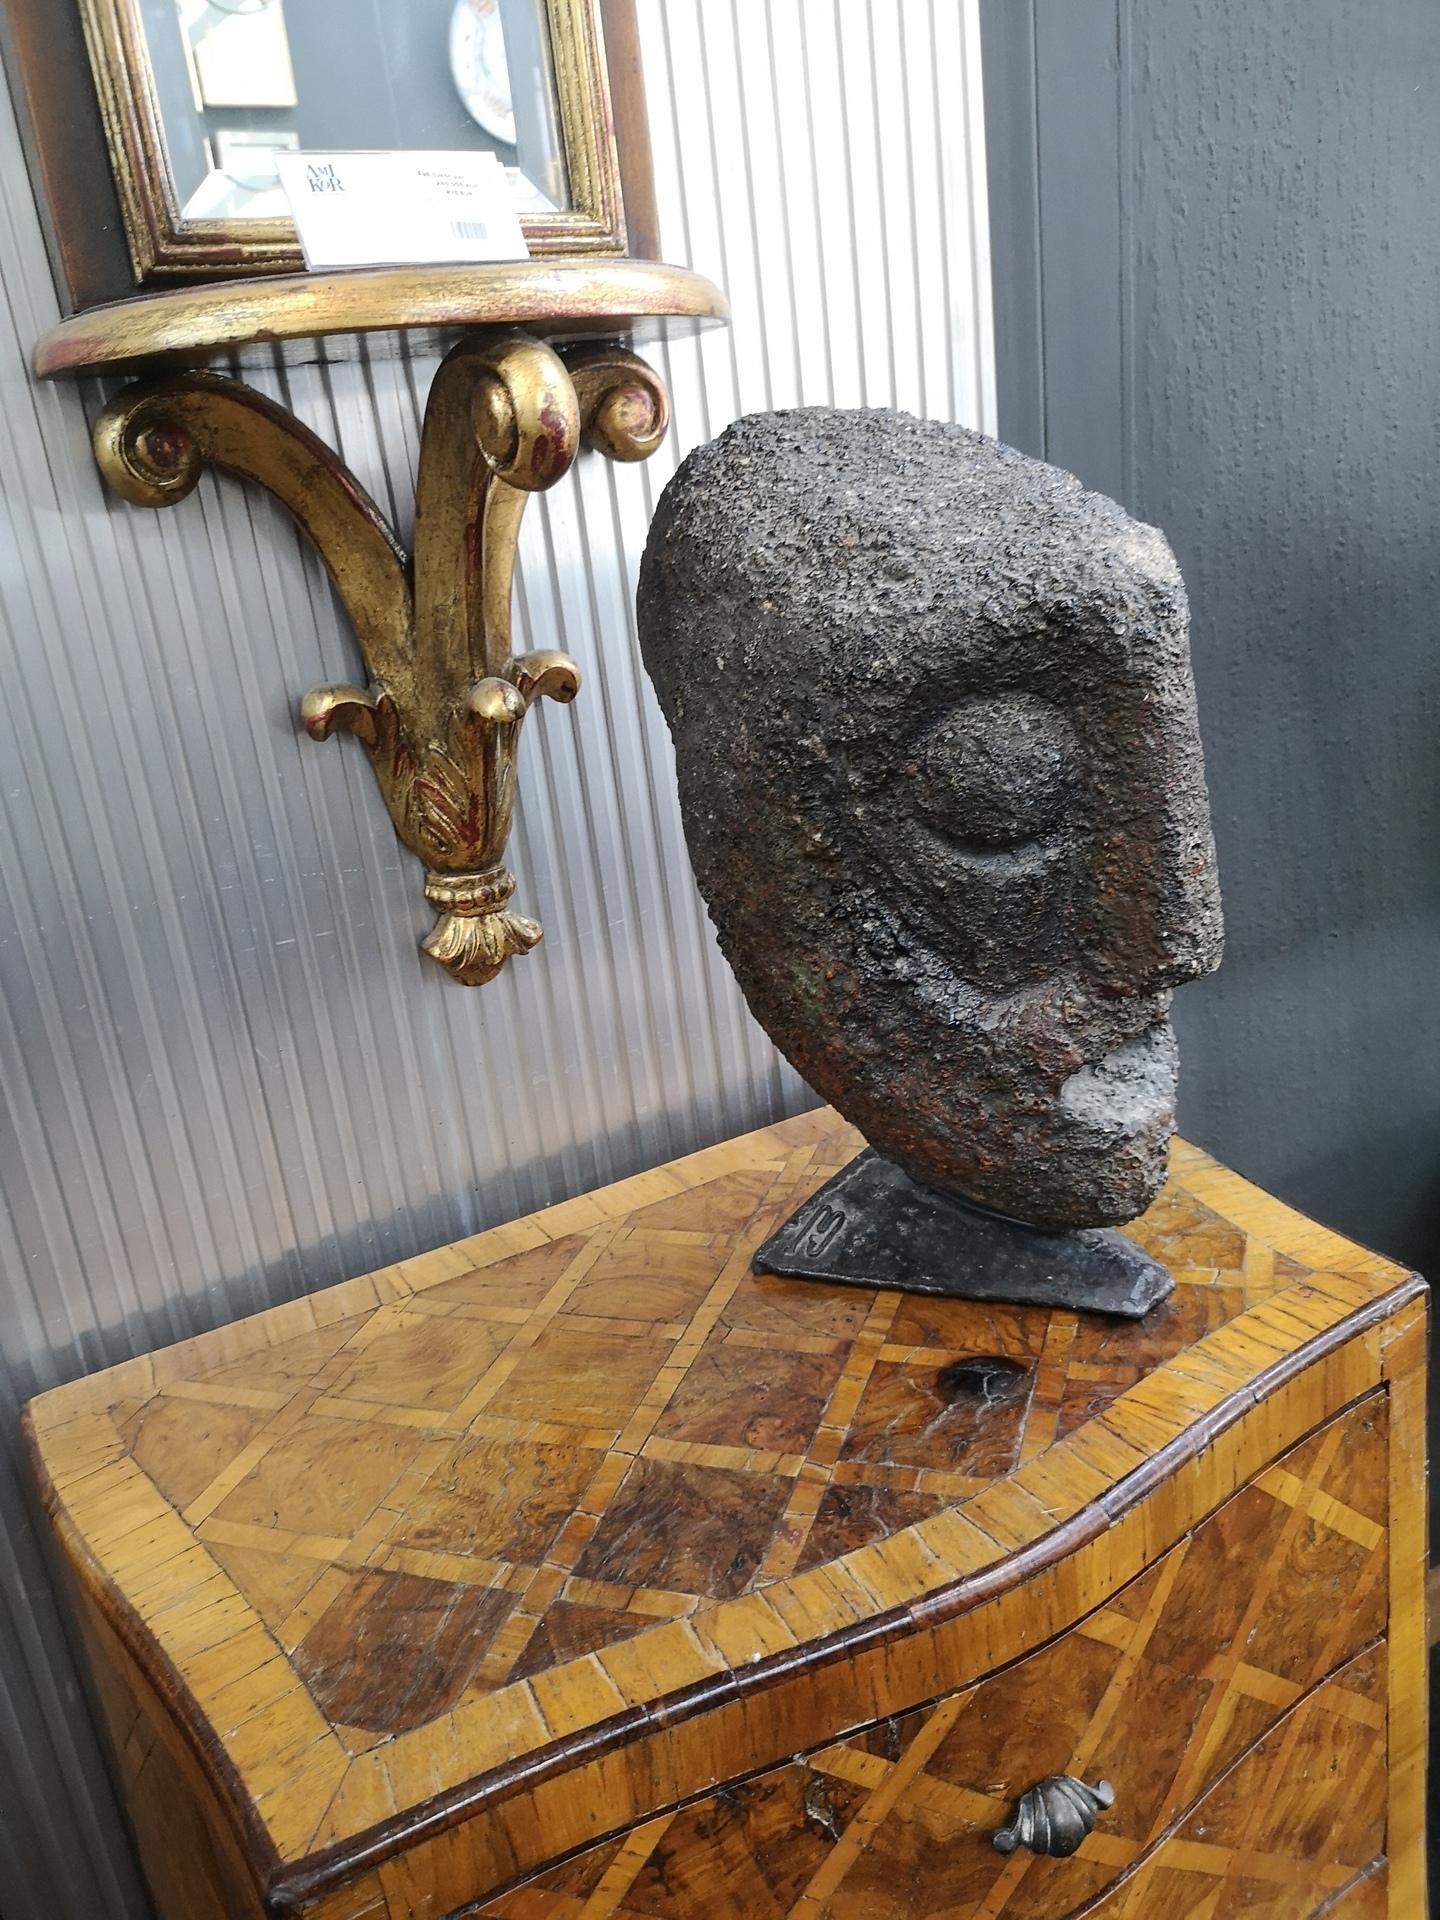 This massive carved stone head was made by Jeno Murai, in the 1970's in brutalist style, and and sits on a steel base, which is signed 